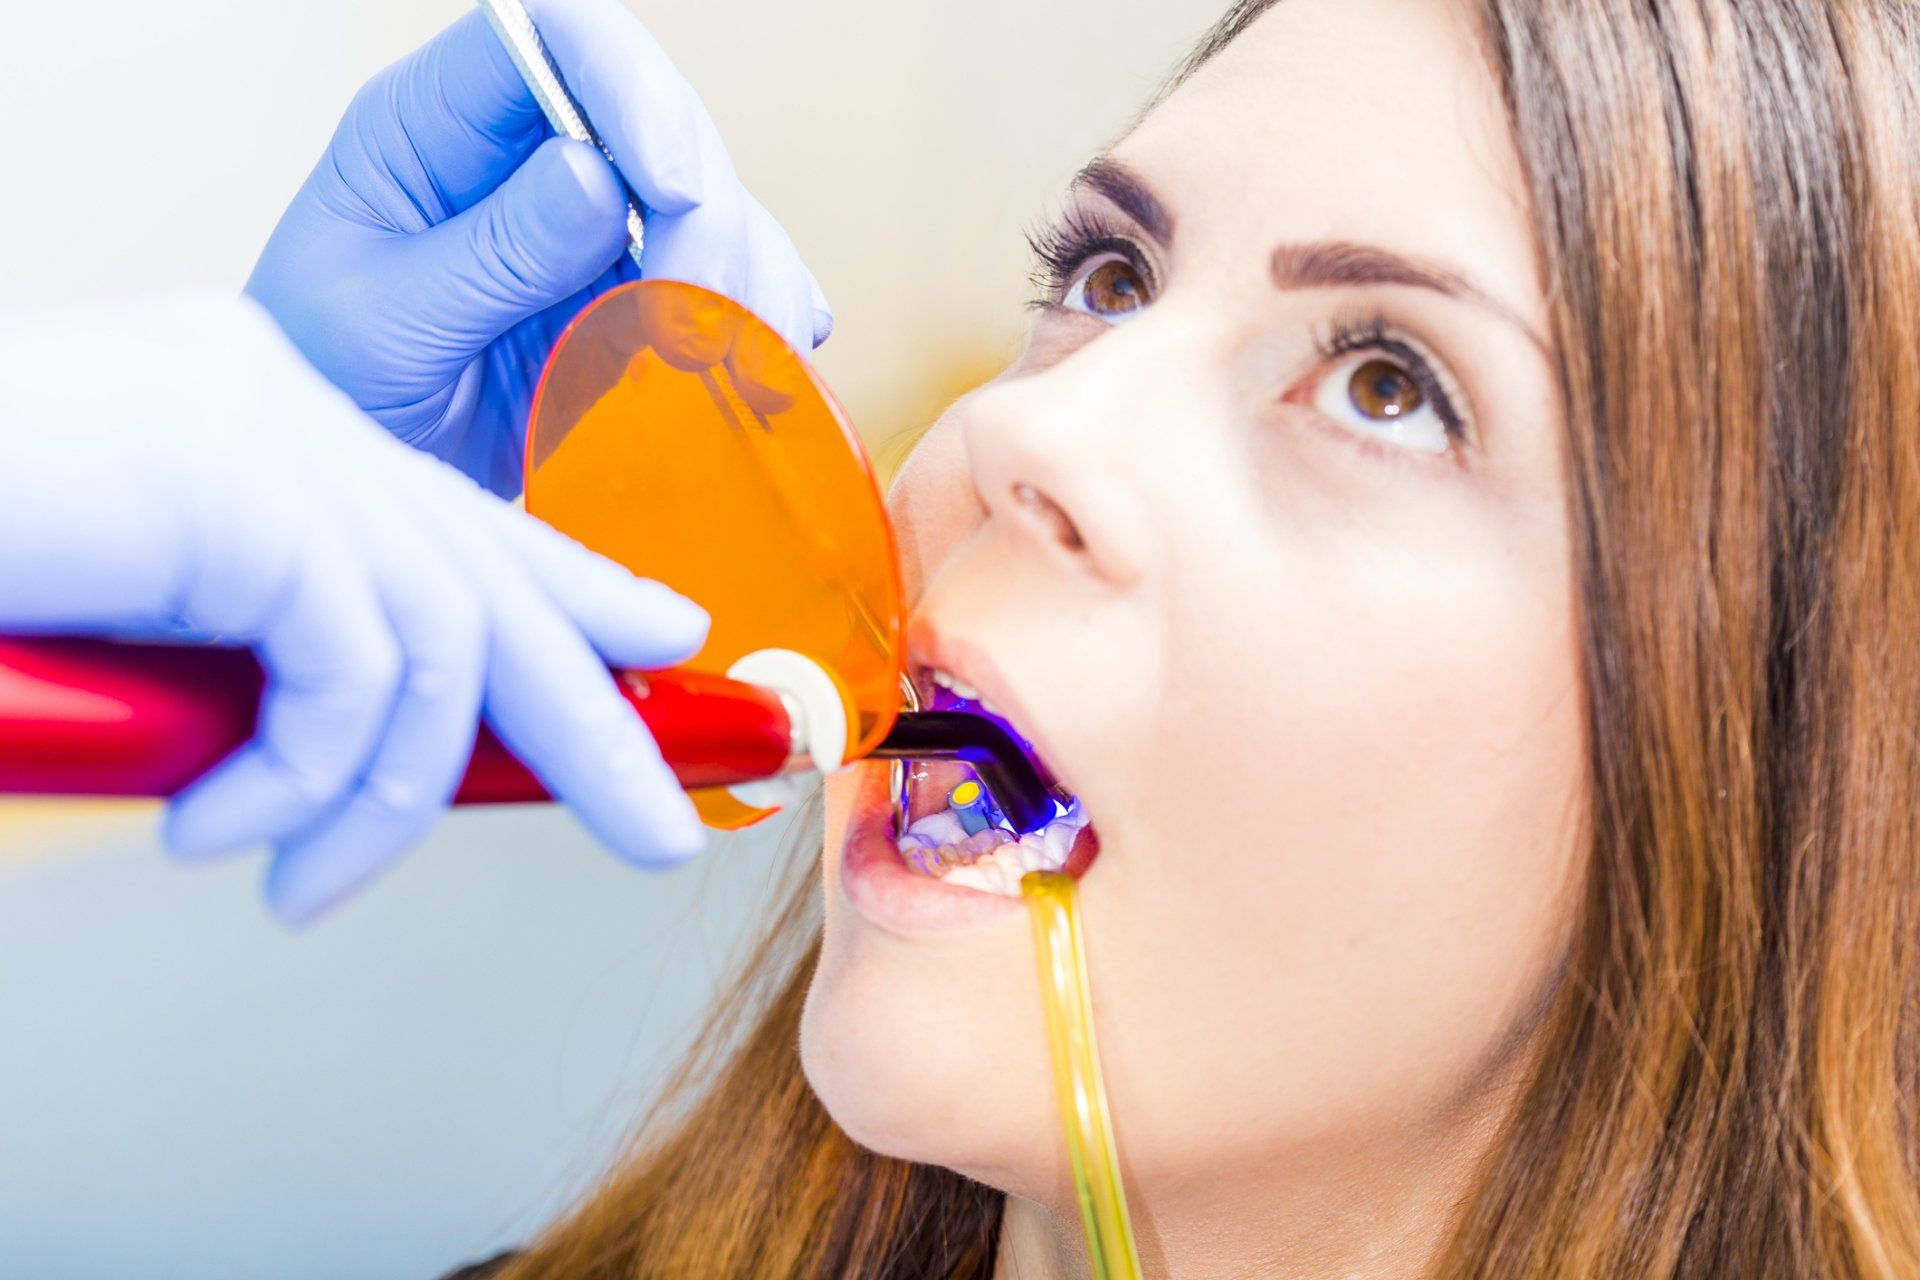 Root Canals, Dental Implants, & Teeth Whitening in Gainesville, FL